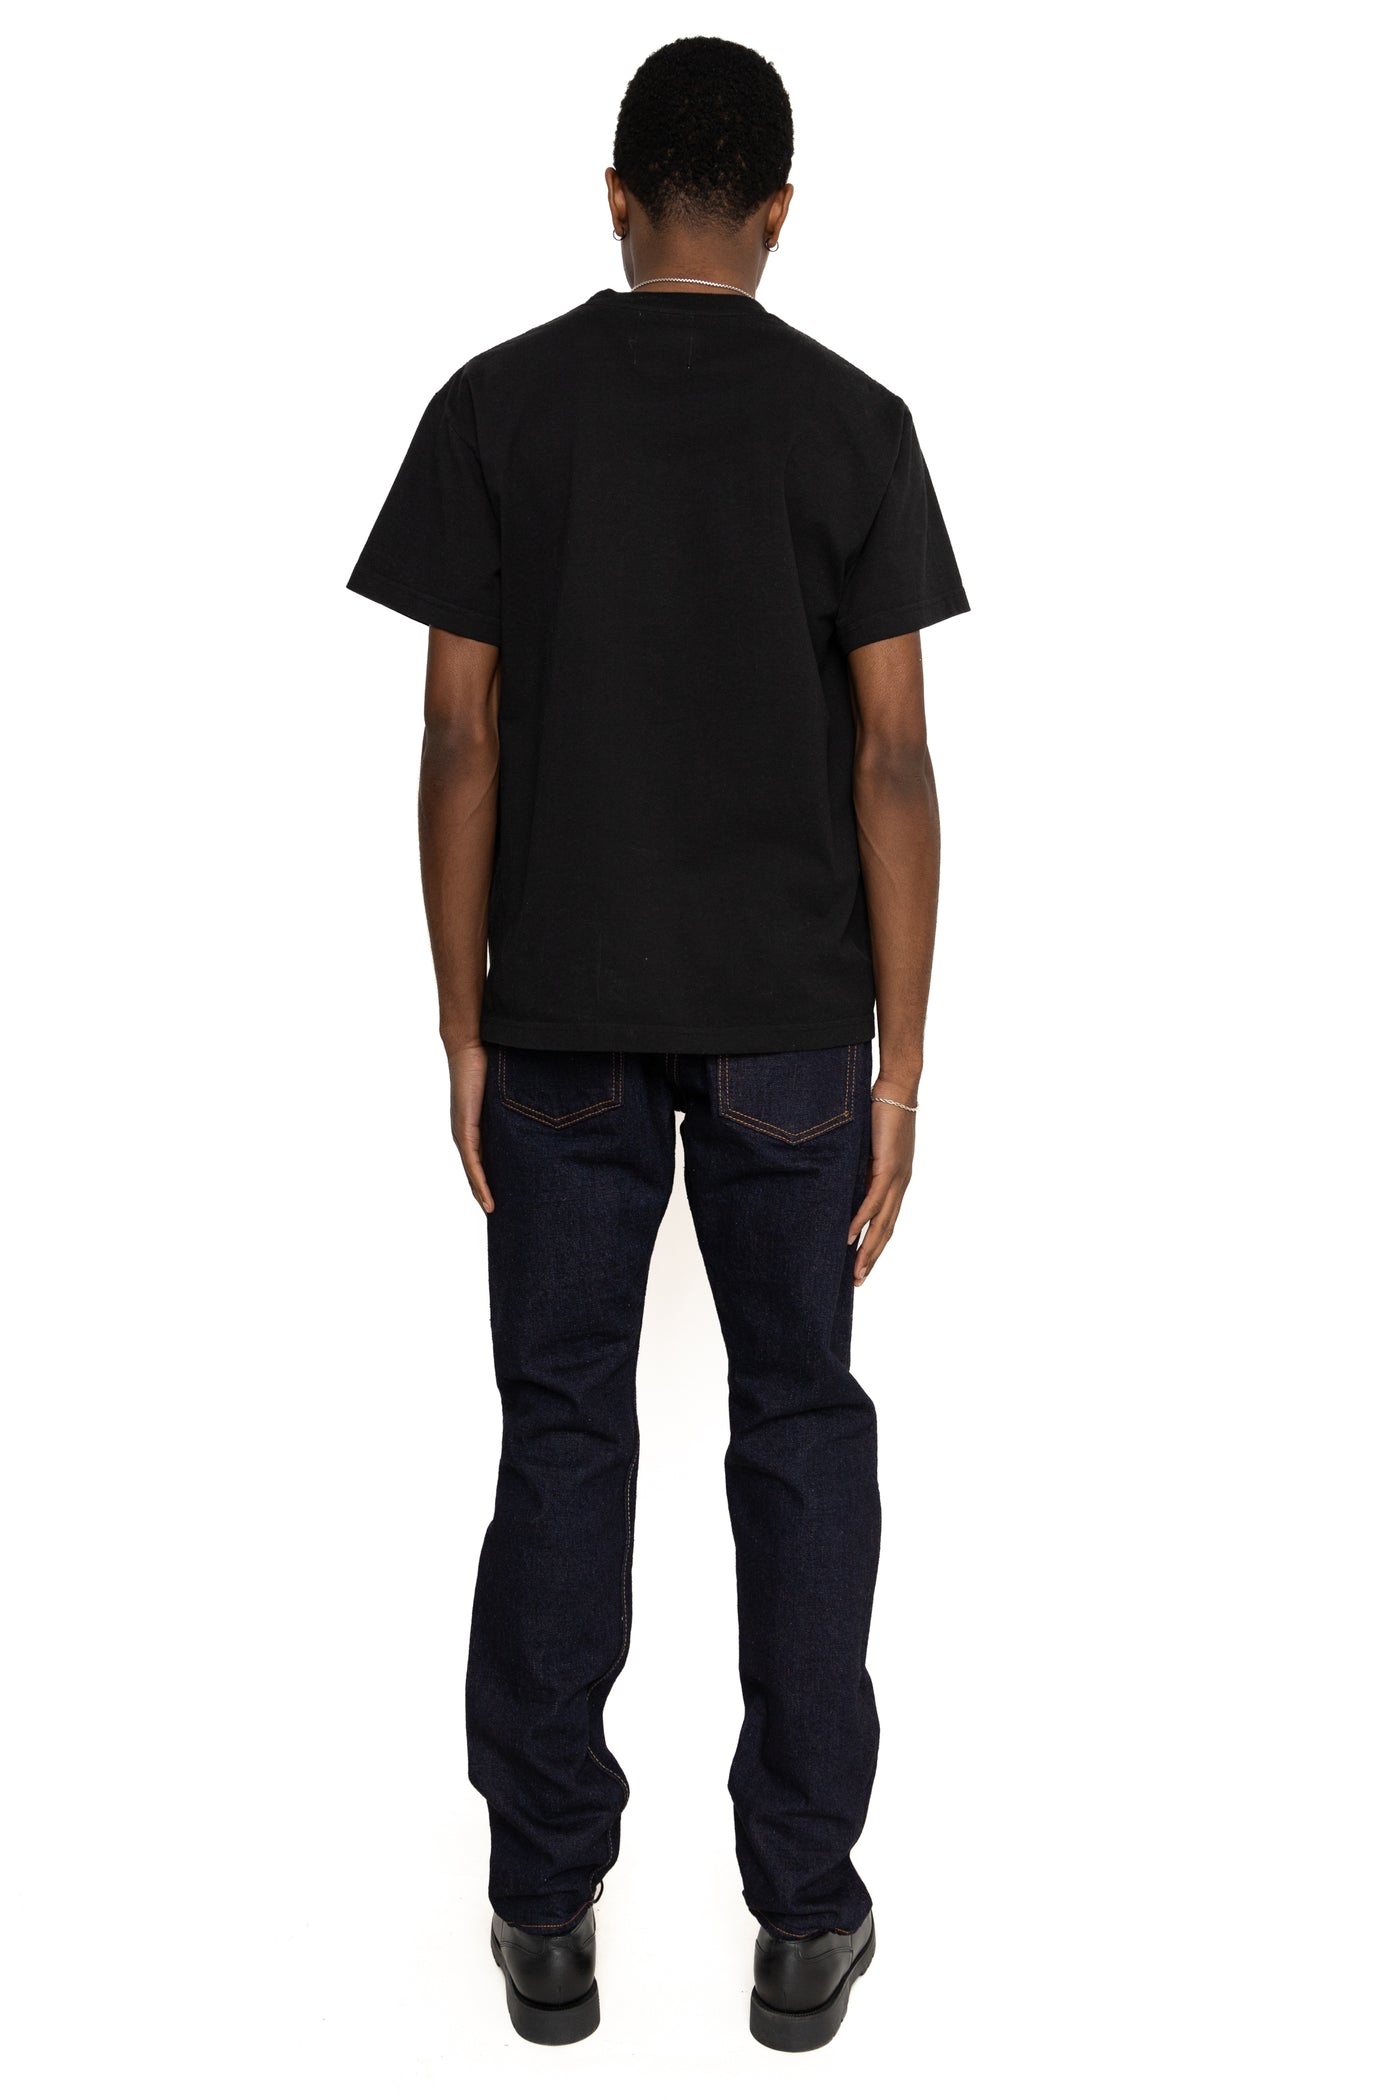 OG-019 14oz Organic Cotton x Recycled Cotton Relaxed Tapered BIG Exclusive Version